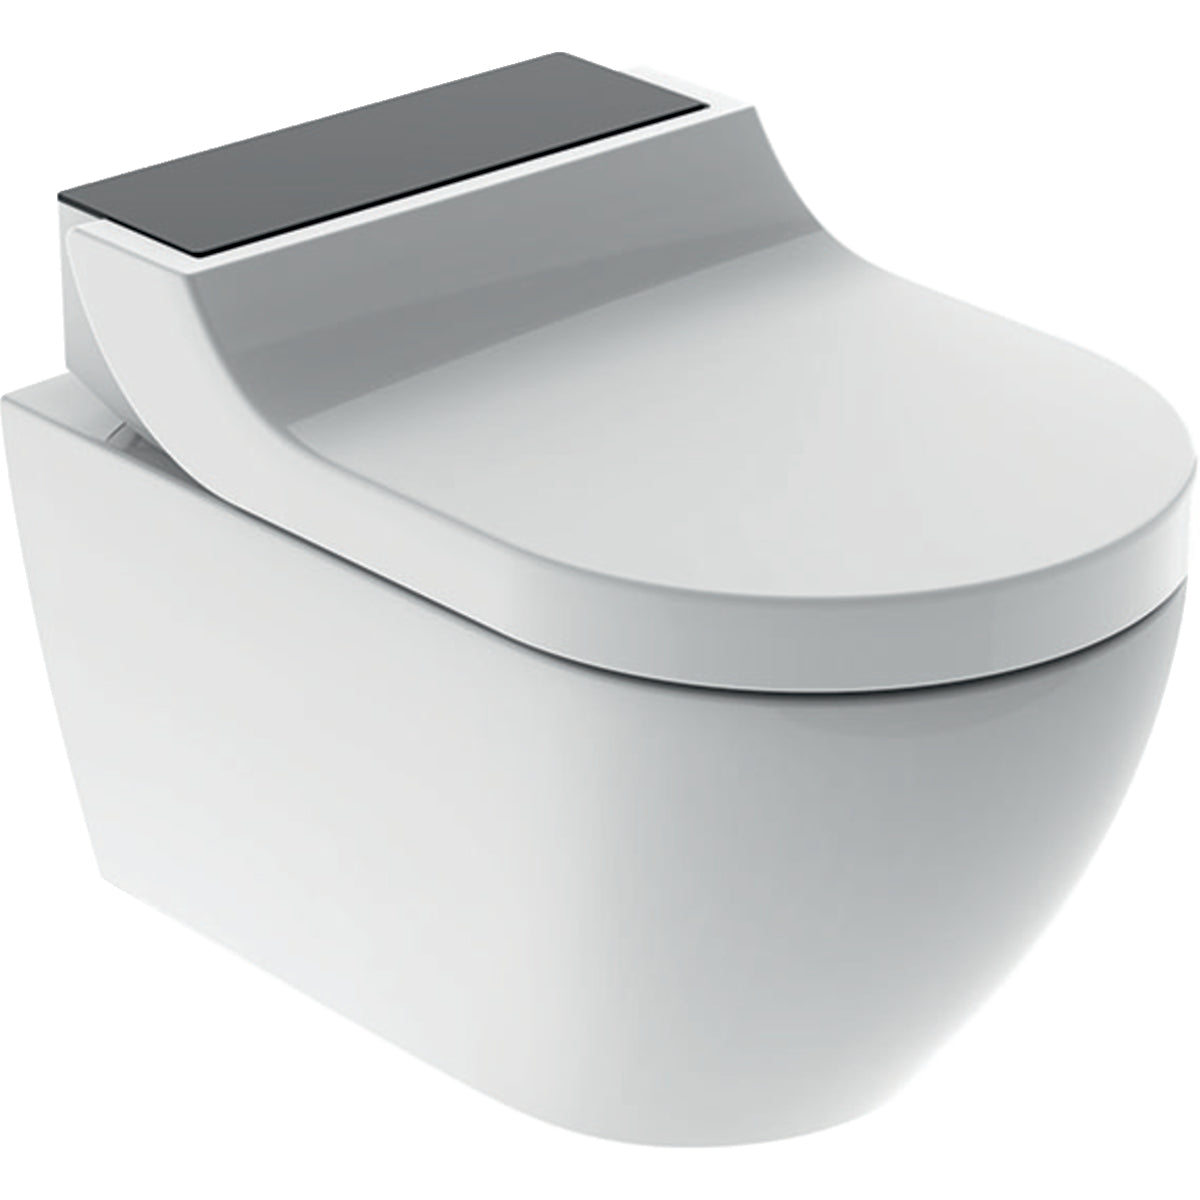 Geberit AquaClean Tuma Comfort Rimless Wall Mounted Shower WC Pan With Soft Close Toilet Seat